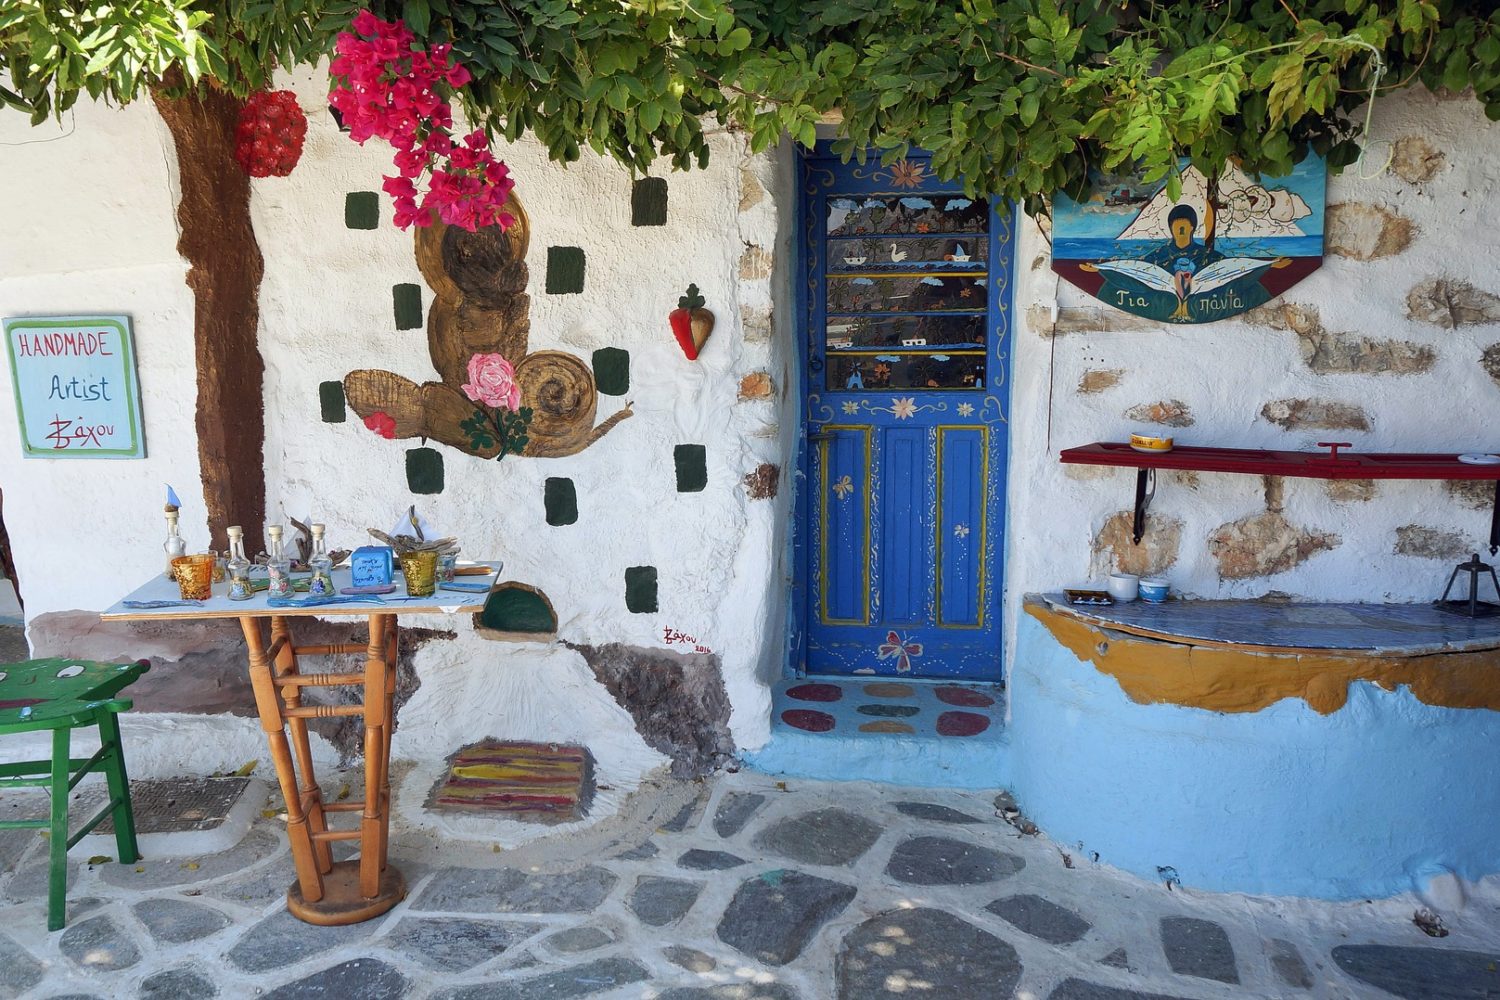 Colorful shop fronts and handicrafts in Amorgos, Greece.